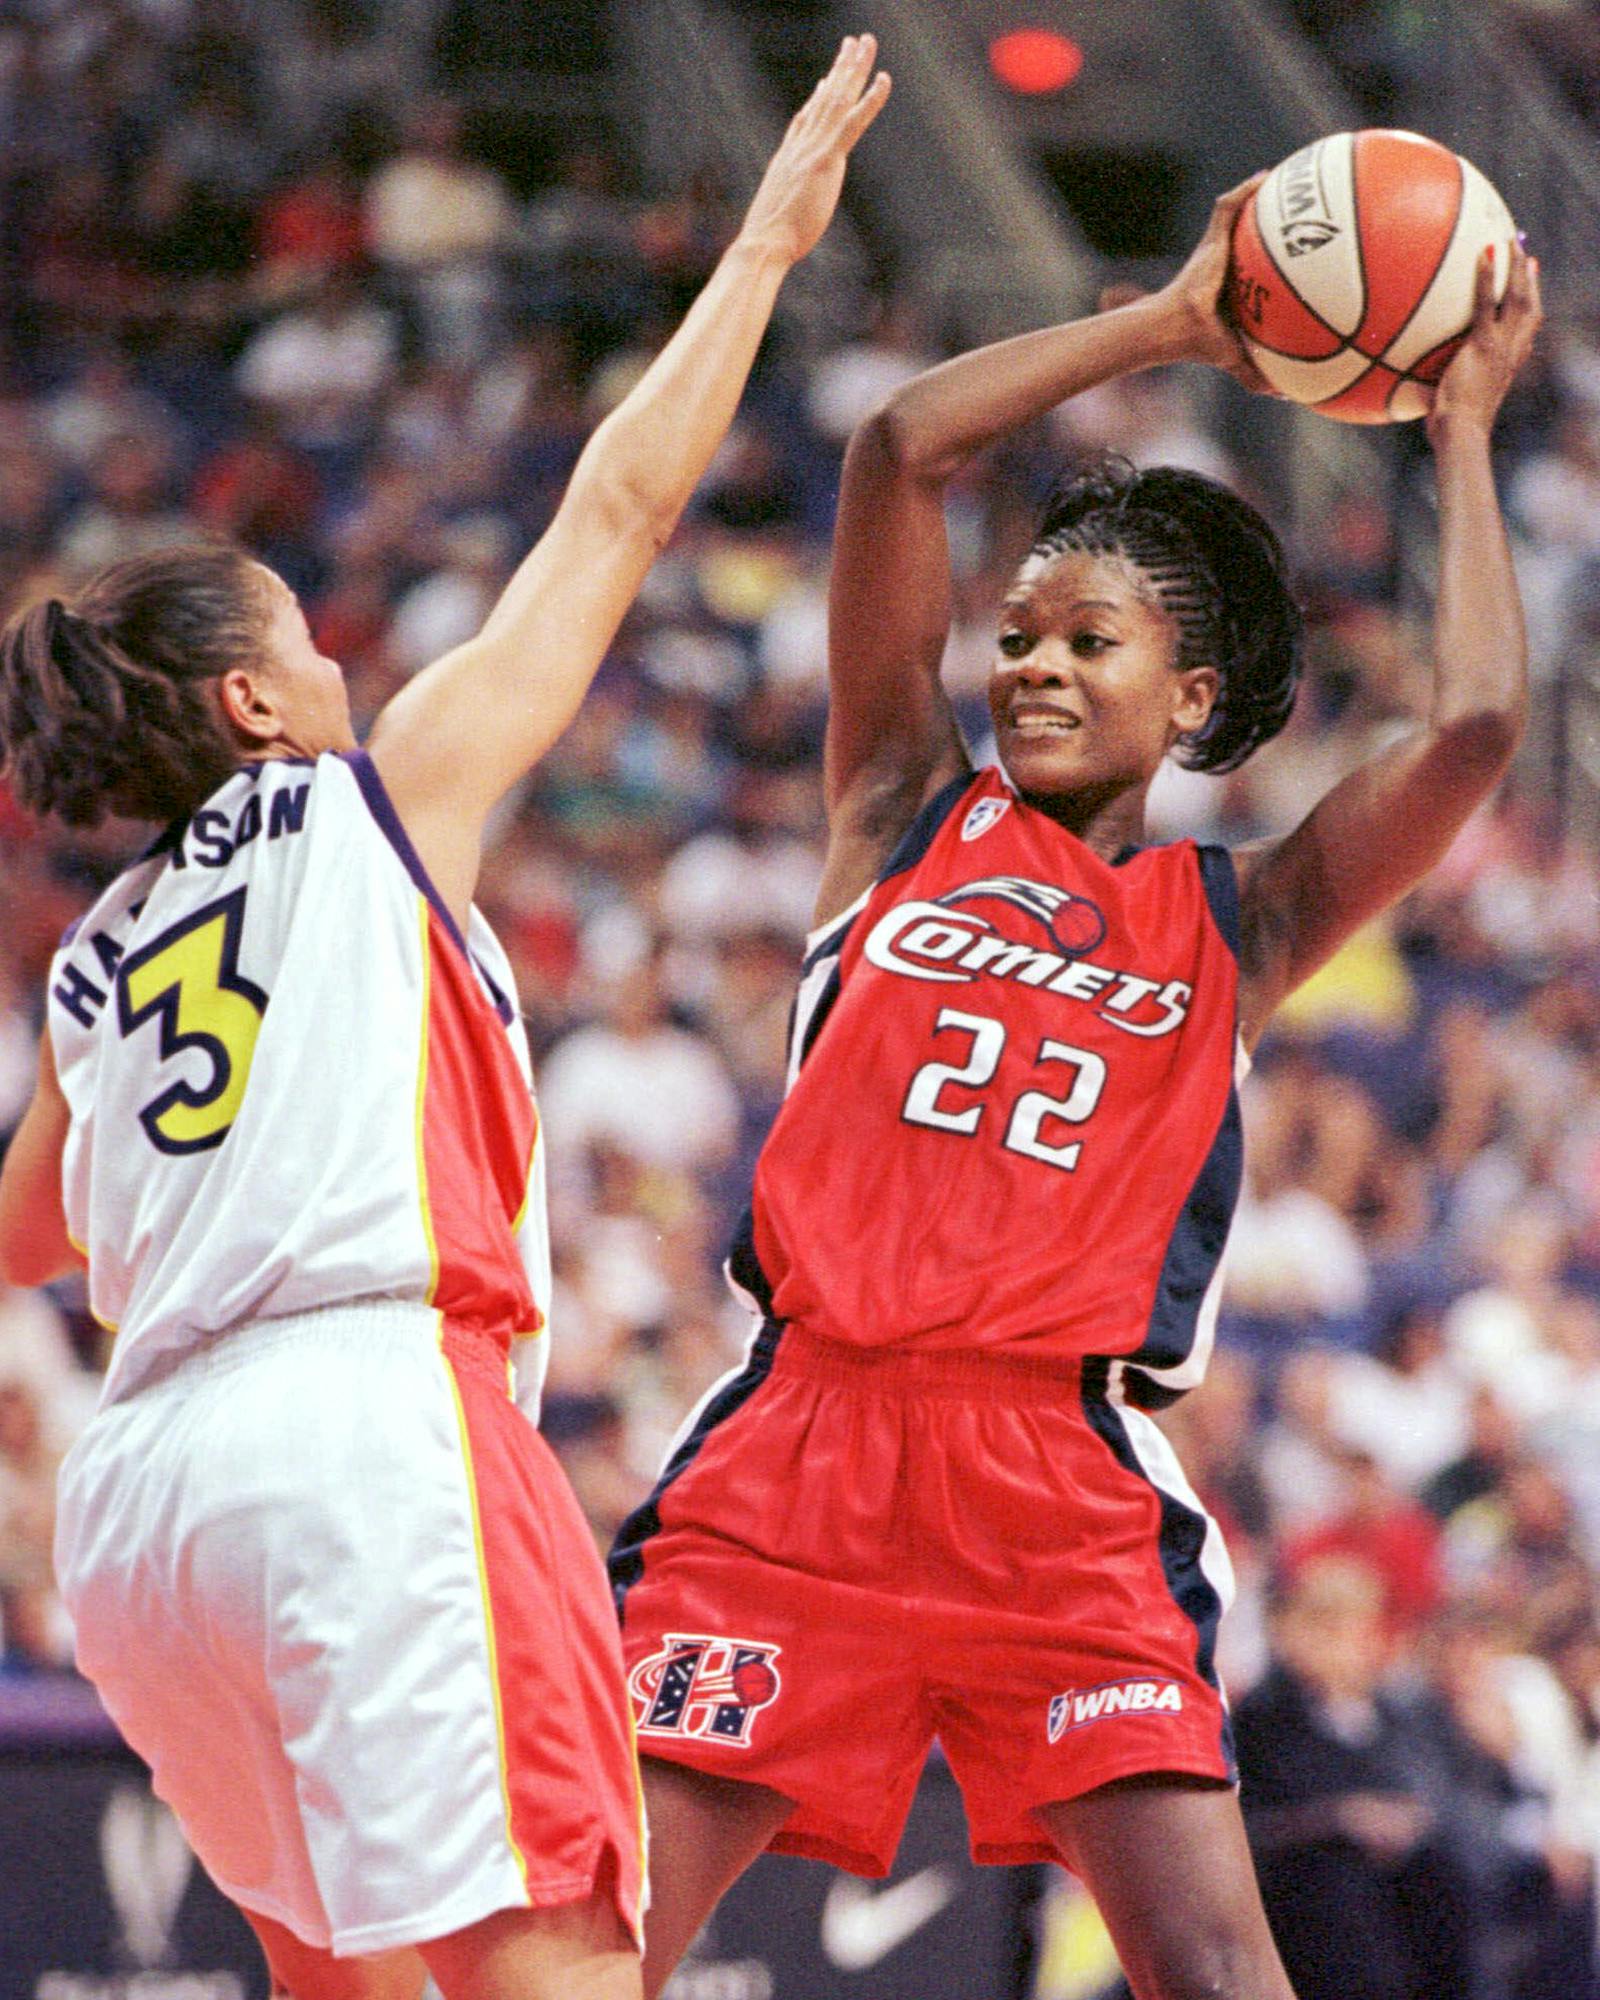 Comets were shooting stars of women's pro basketball